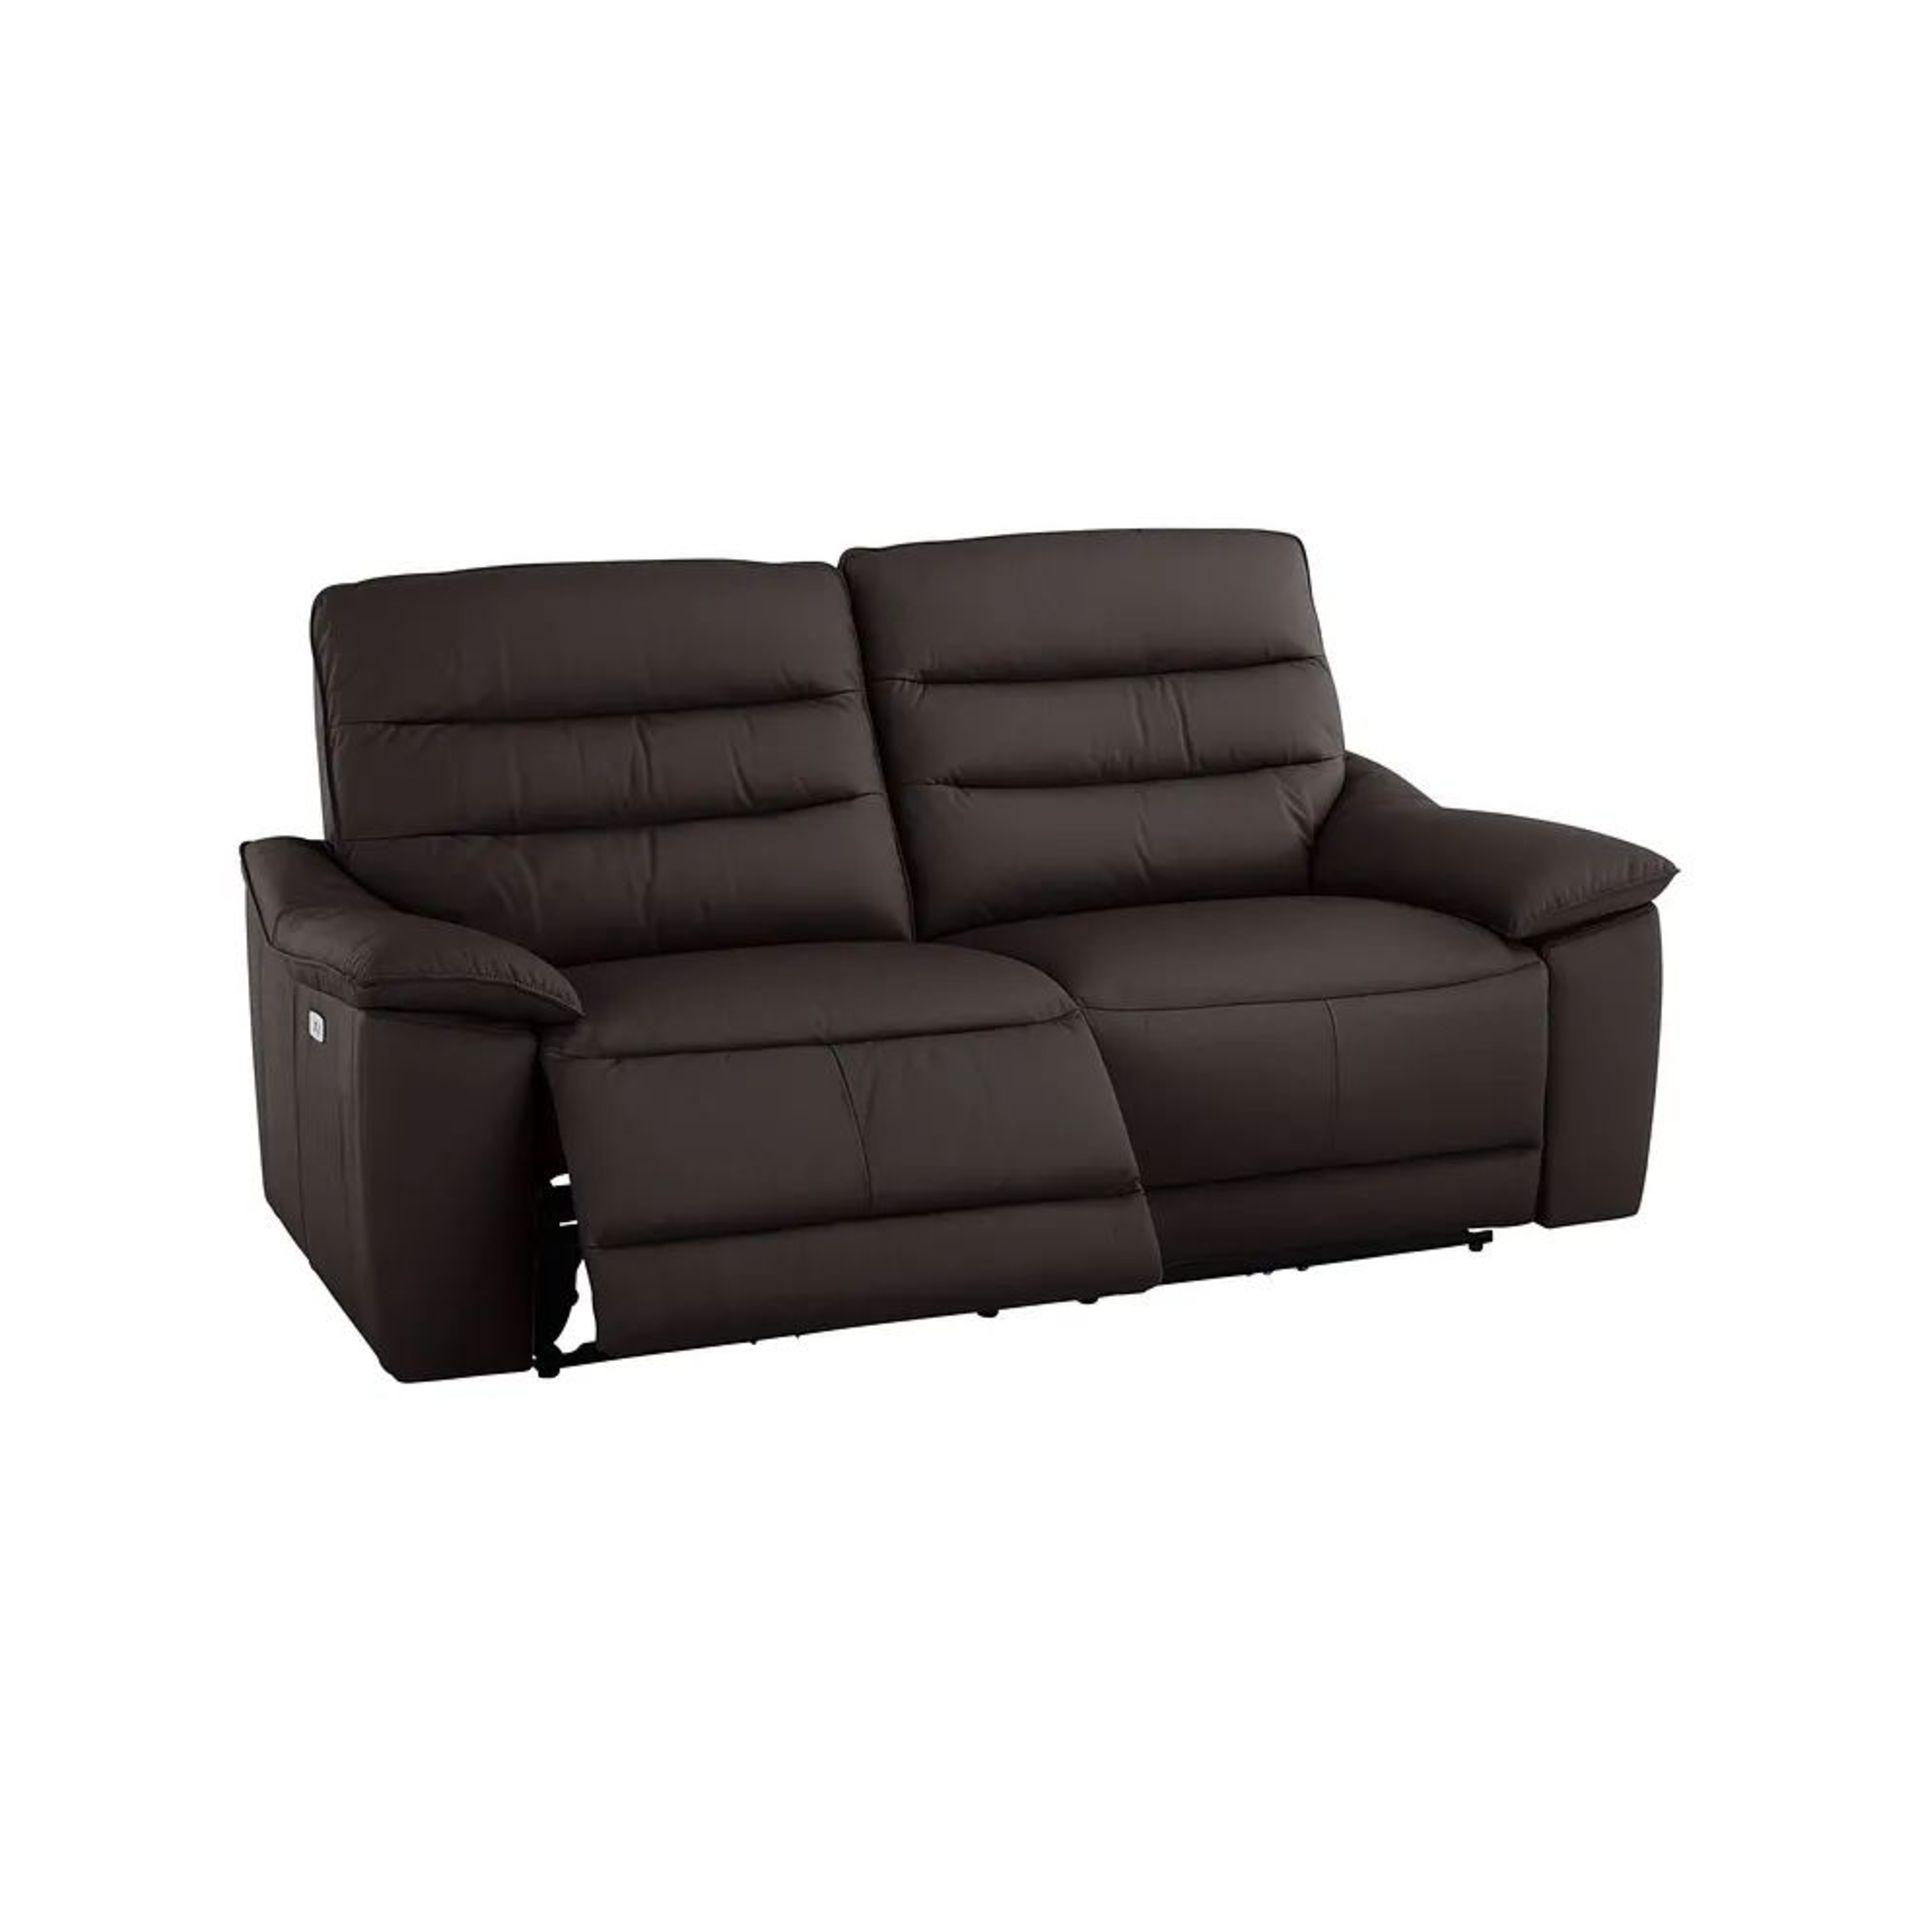 BRAND NEW CARTER 3 Seater Electric Recliner Sofa - BROWN LEATHER. RRP £1699. Showcasing classic - Image 3 of 11